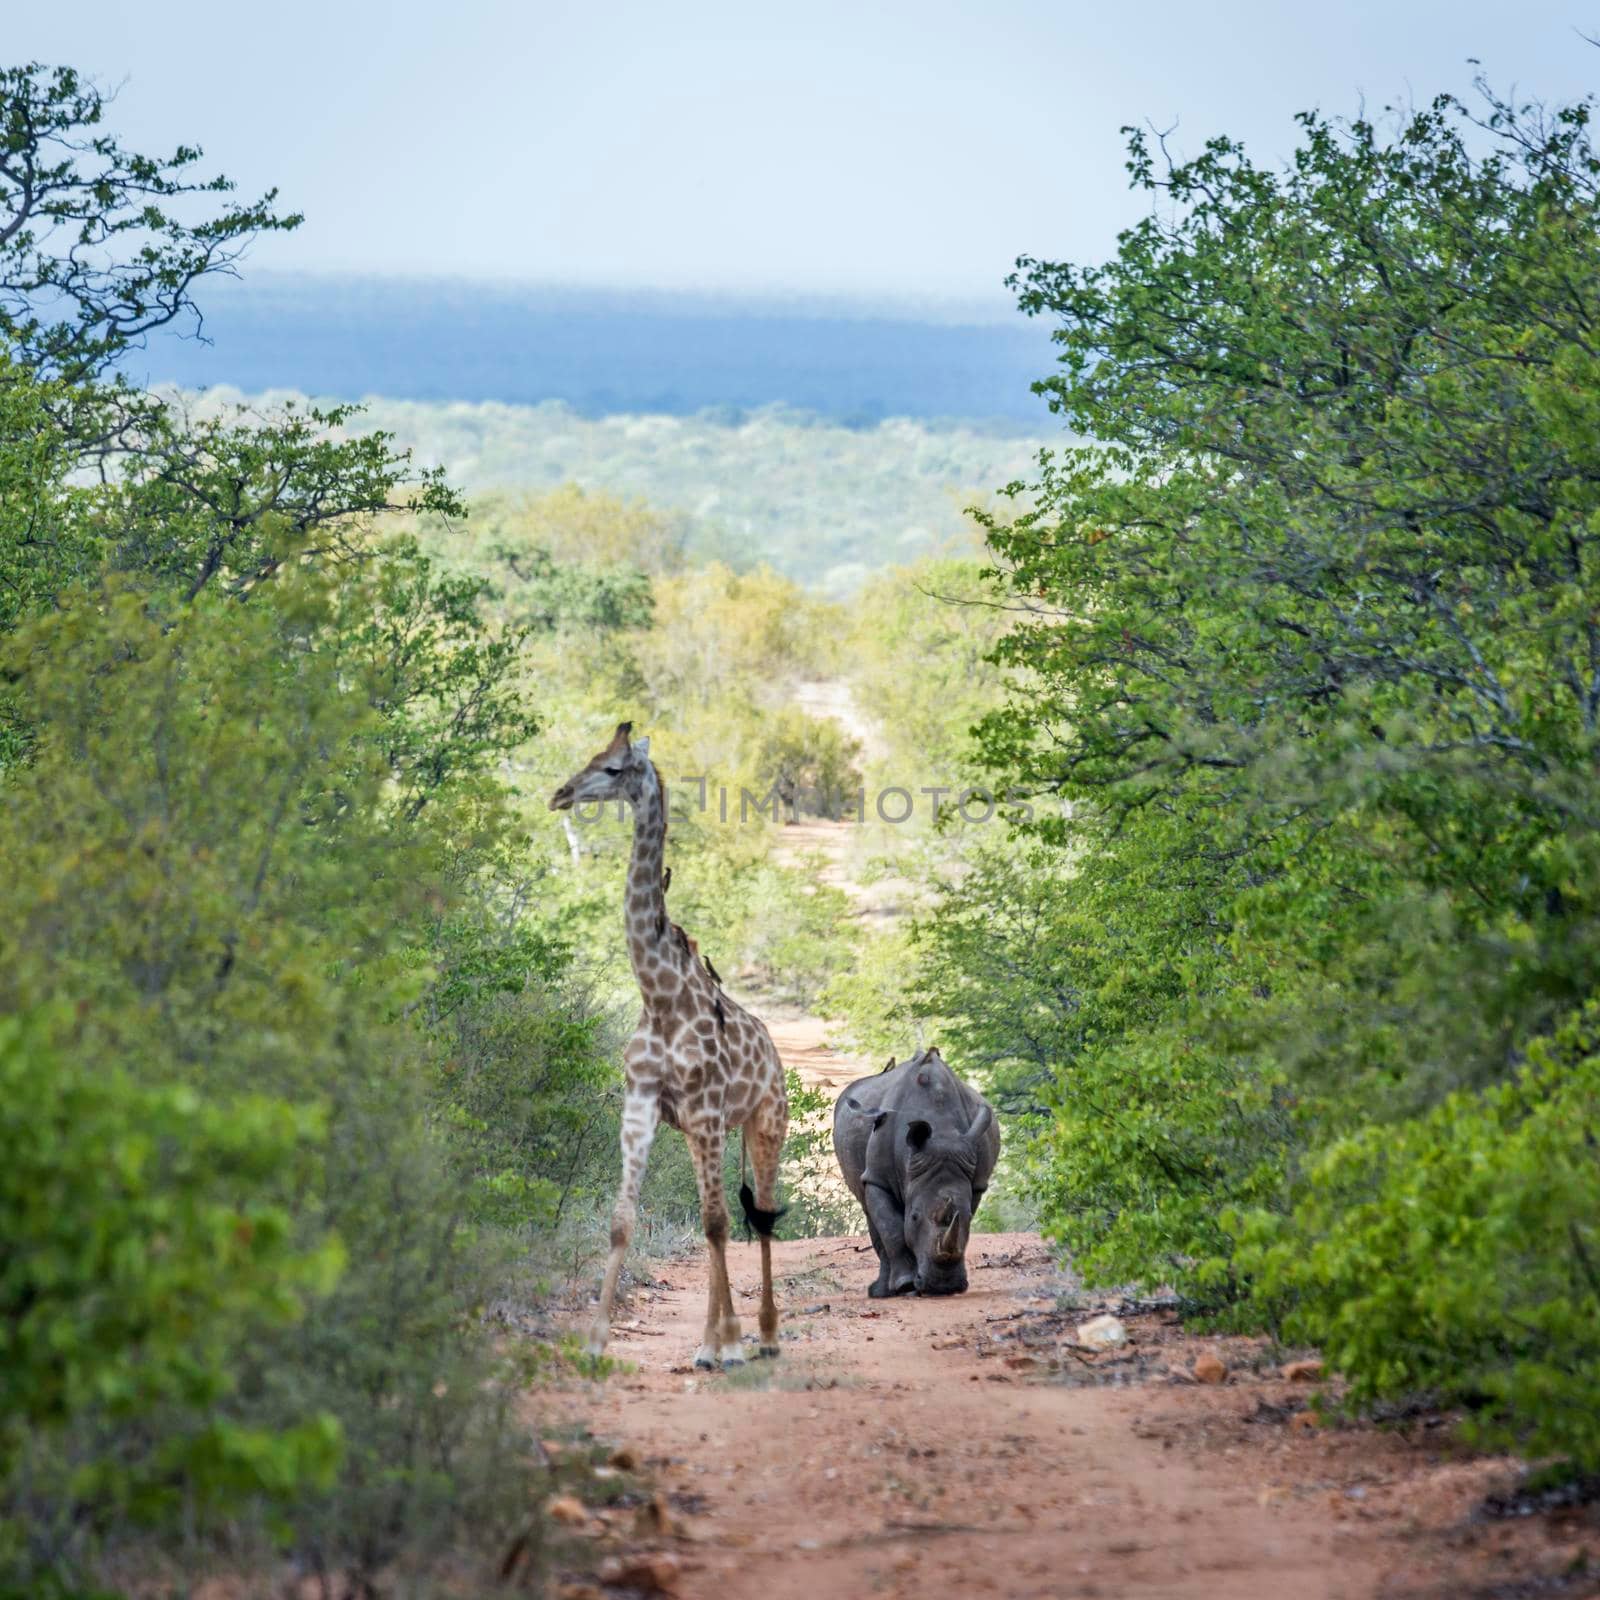 Southern white rhinoceros and giraffe in Kruger National park, South Africa by PACOCOMO